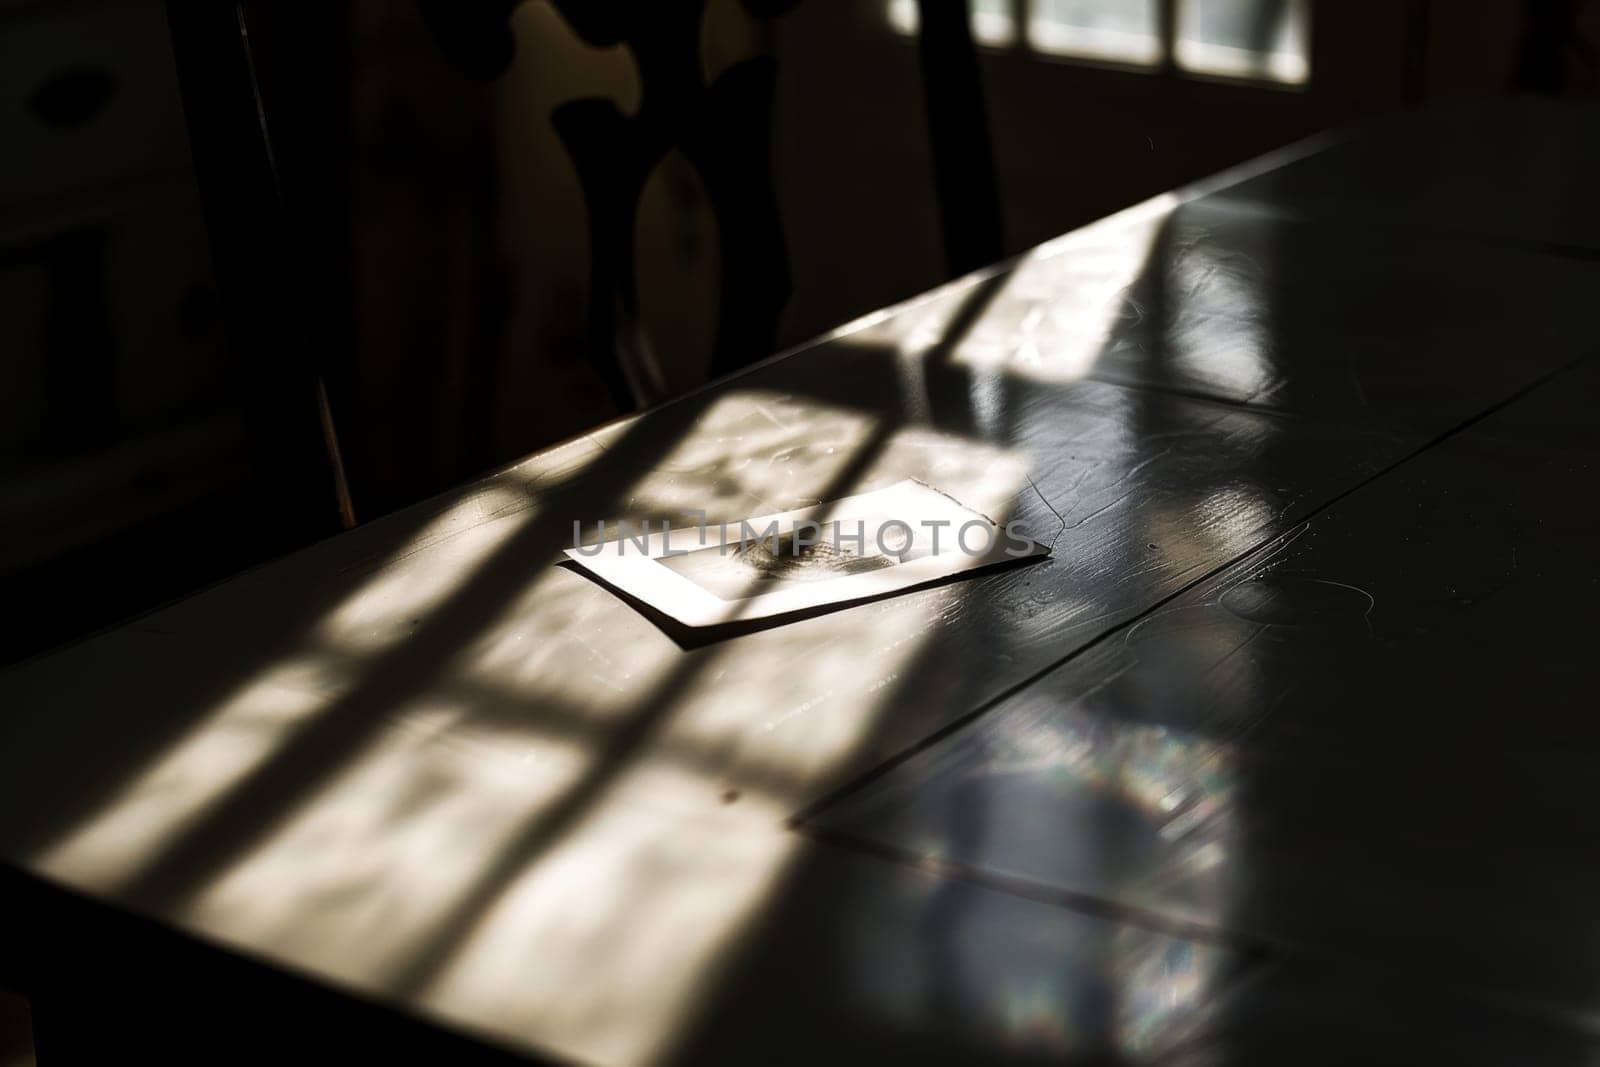 An evocative scene where a solitary photograph lies on a table, bathed in sunlight that casts dramatic shadows, invoking nostalgia and reflection.